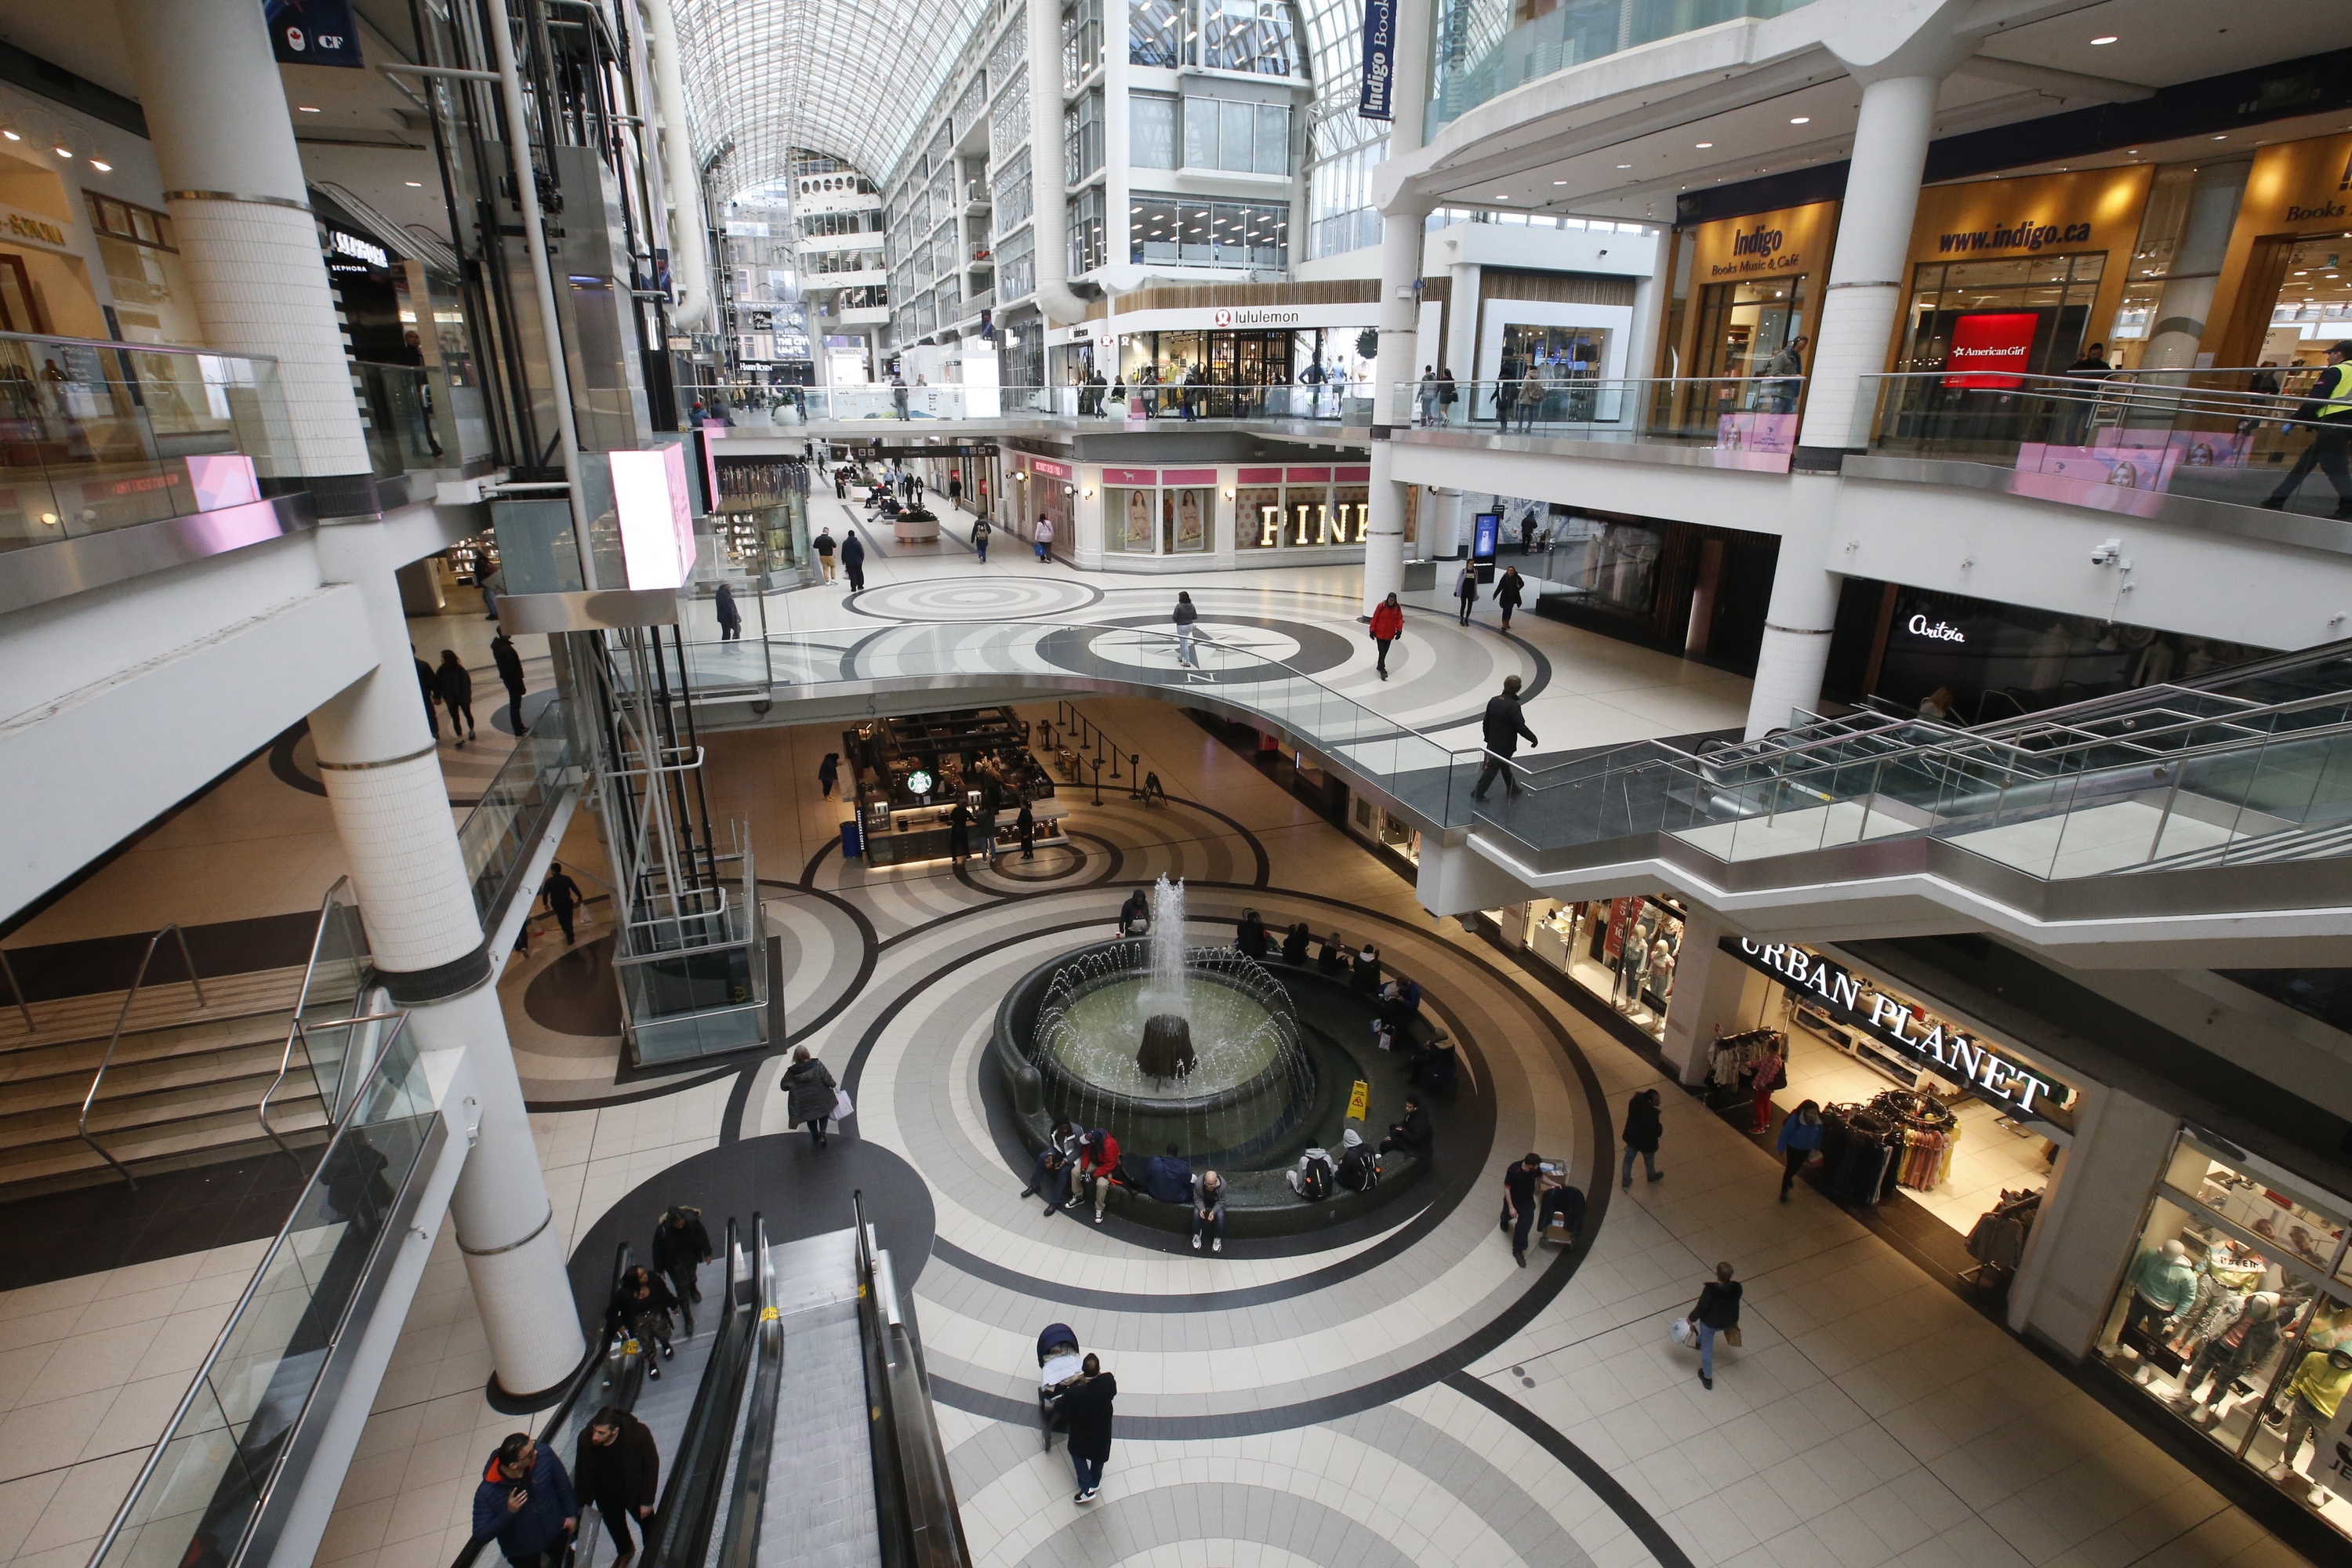 Only 20-25 % of Eaton Centre tenants paid April rent and many have May rent  deferred